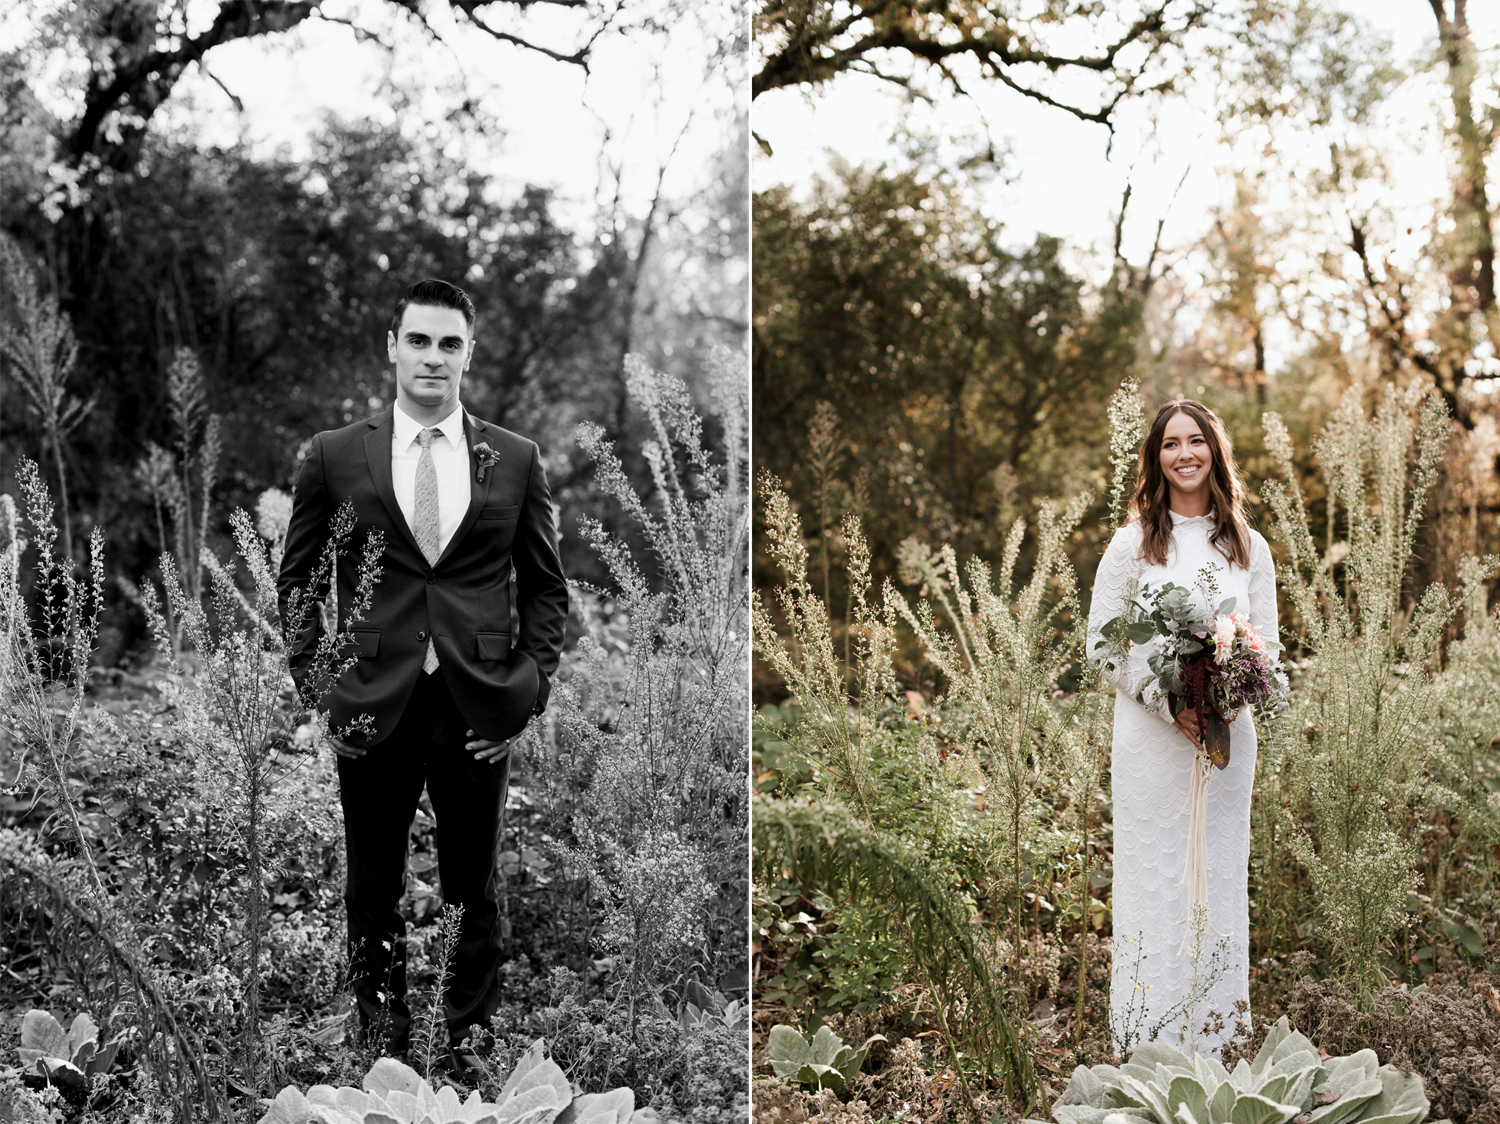 A stylish bride and groom pose for portraits in Chico, California. By Chico Wedding Photographer Briana Morrison